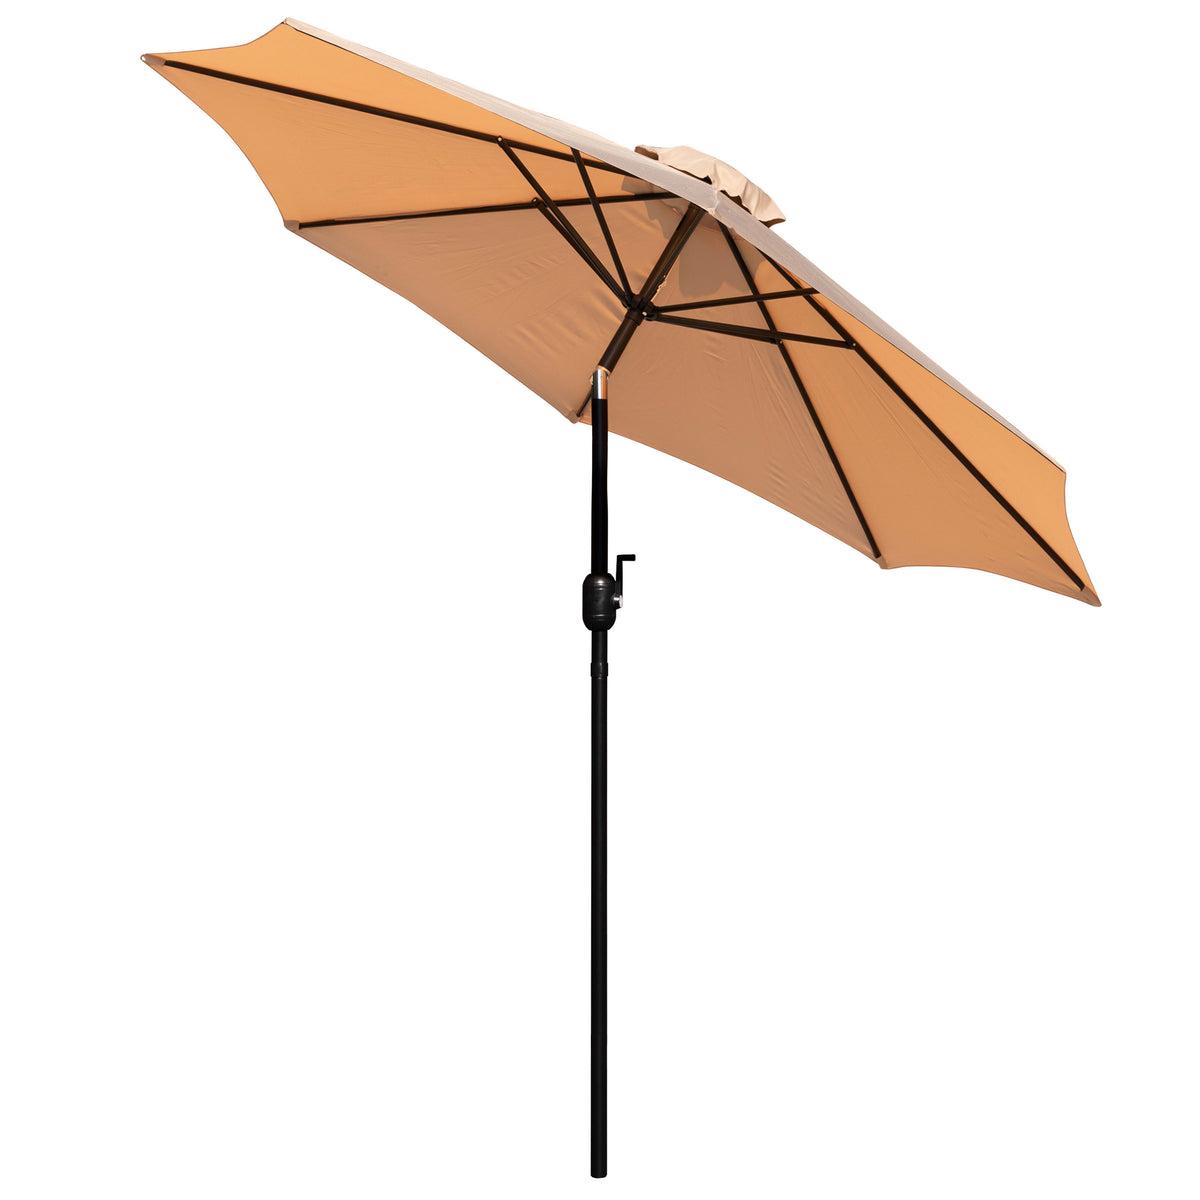 Tan |#| 35inch Square Faux Teak Patio Table, 2 Chairs and Tan 9FT Patio Umbrella with Base